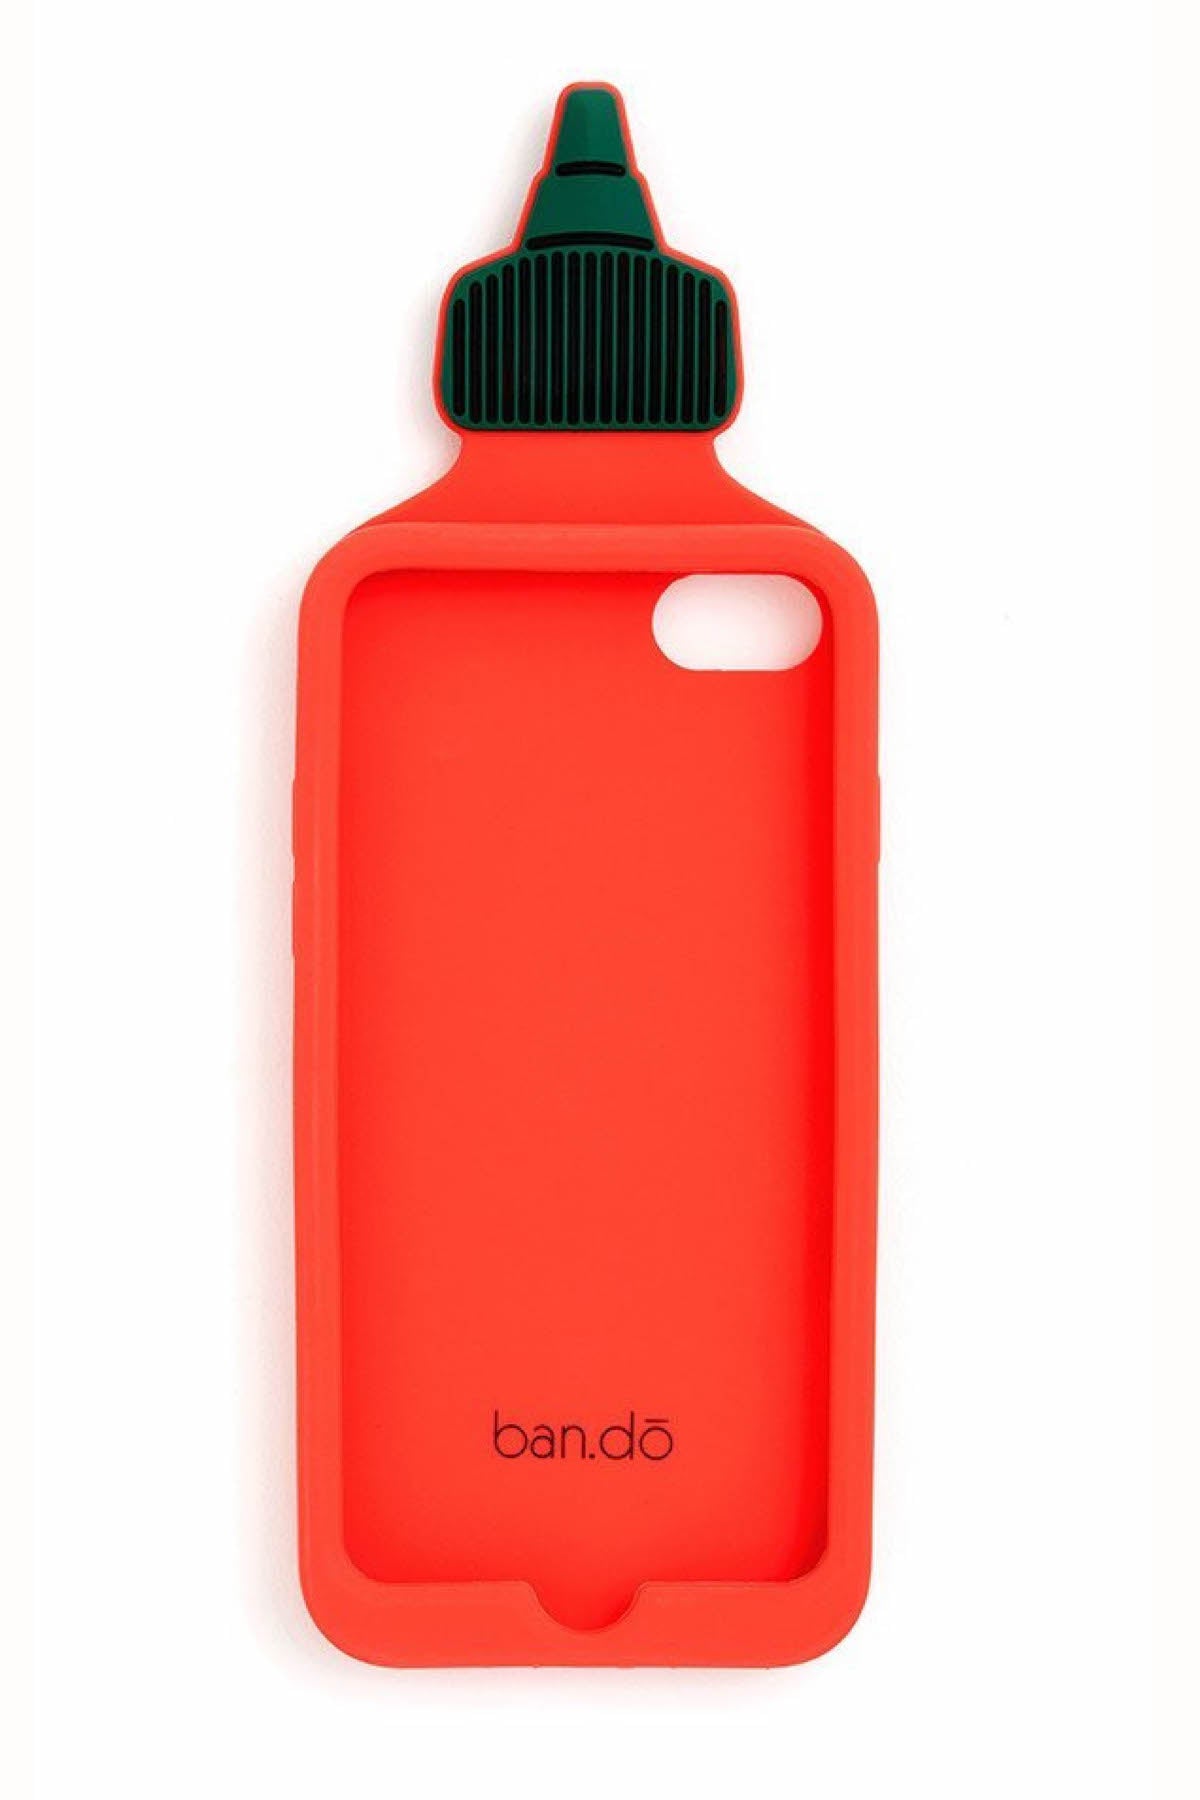 Ban.do Extra Spicy Silicone iPhone Case